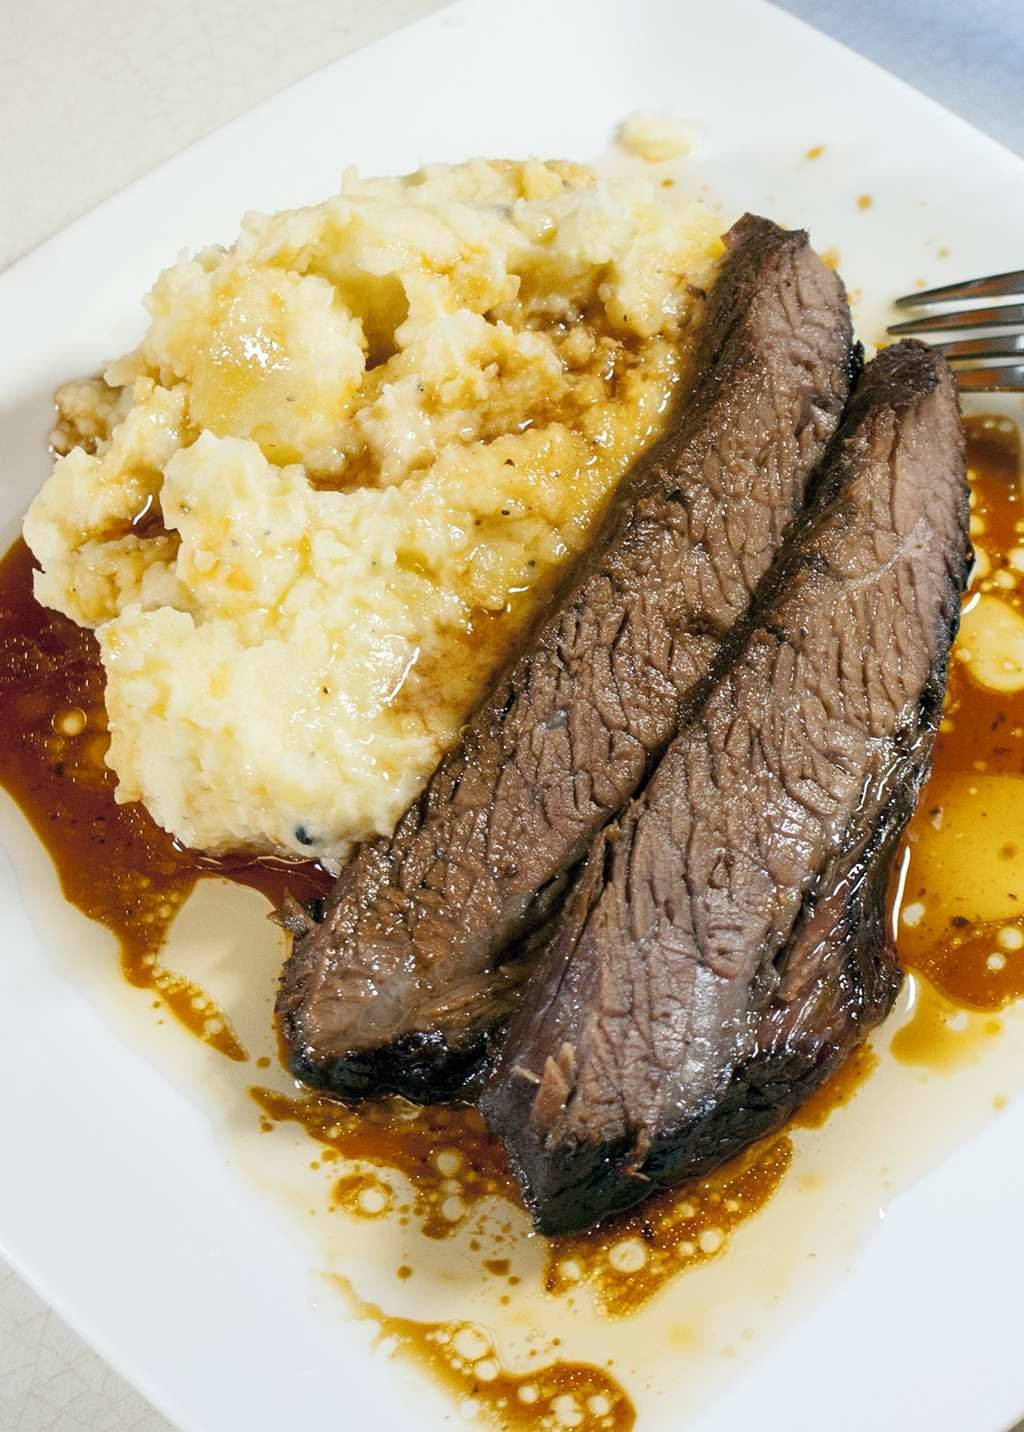 Smoked Beef Brisket Recipes
 Oven Smoked Brisket Texas Style Brisket Without a Smoker